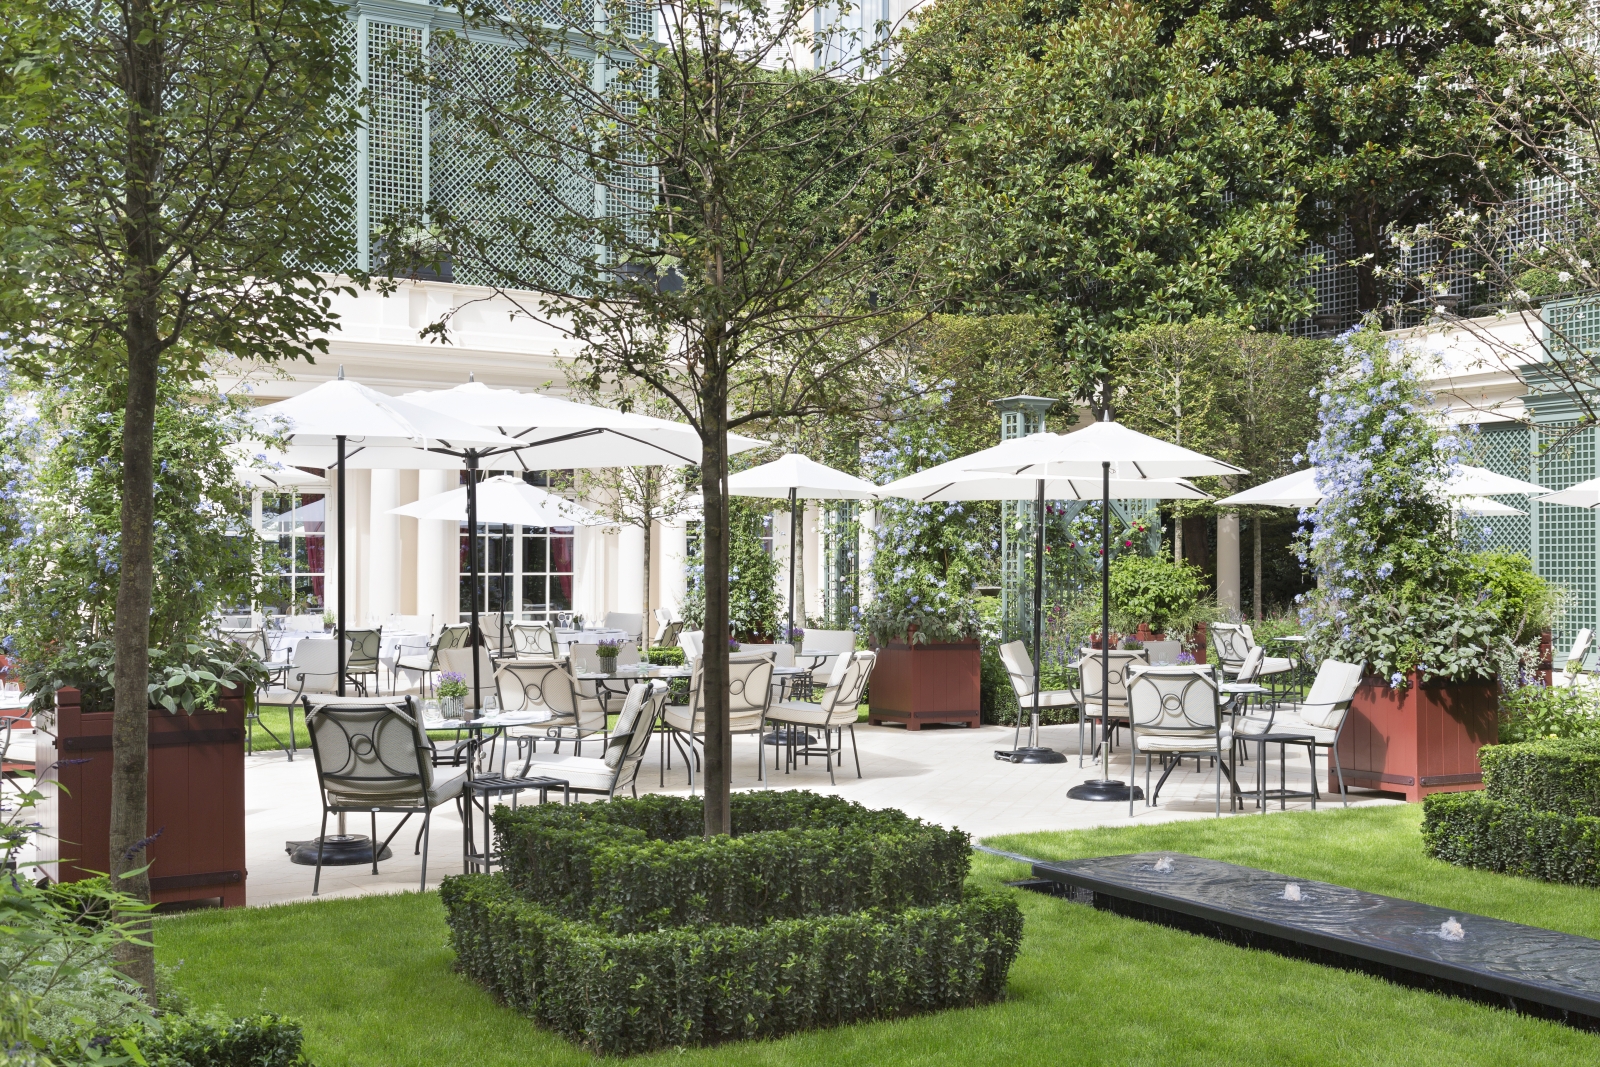 Terrace dining in the gardens of luxury hotel Le Bristol in Paris, France